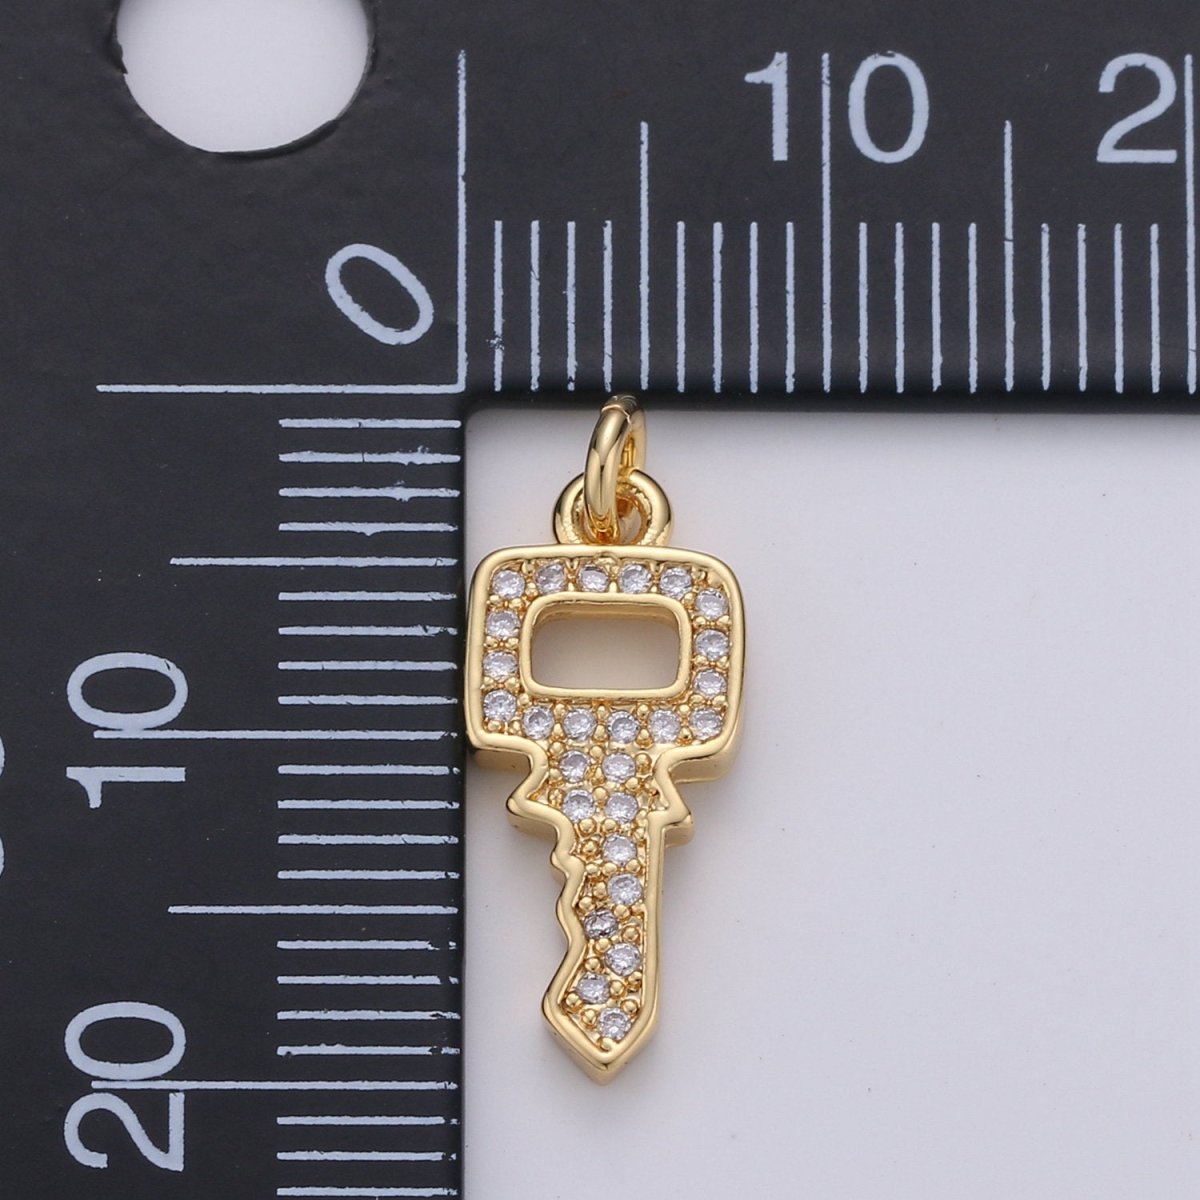 Dainty Key charm with Clear cz• 20x7mm • 24k Gold Filled• Sparkly Cubic Zirconia Car Key Charm • Silver Charm for Necklace Bracelet Earring D-370 D-371 - DLUXCA